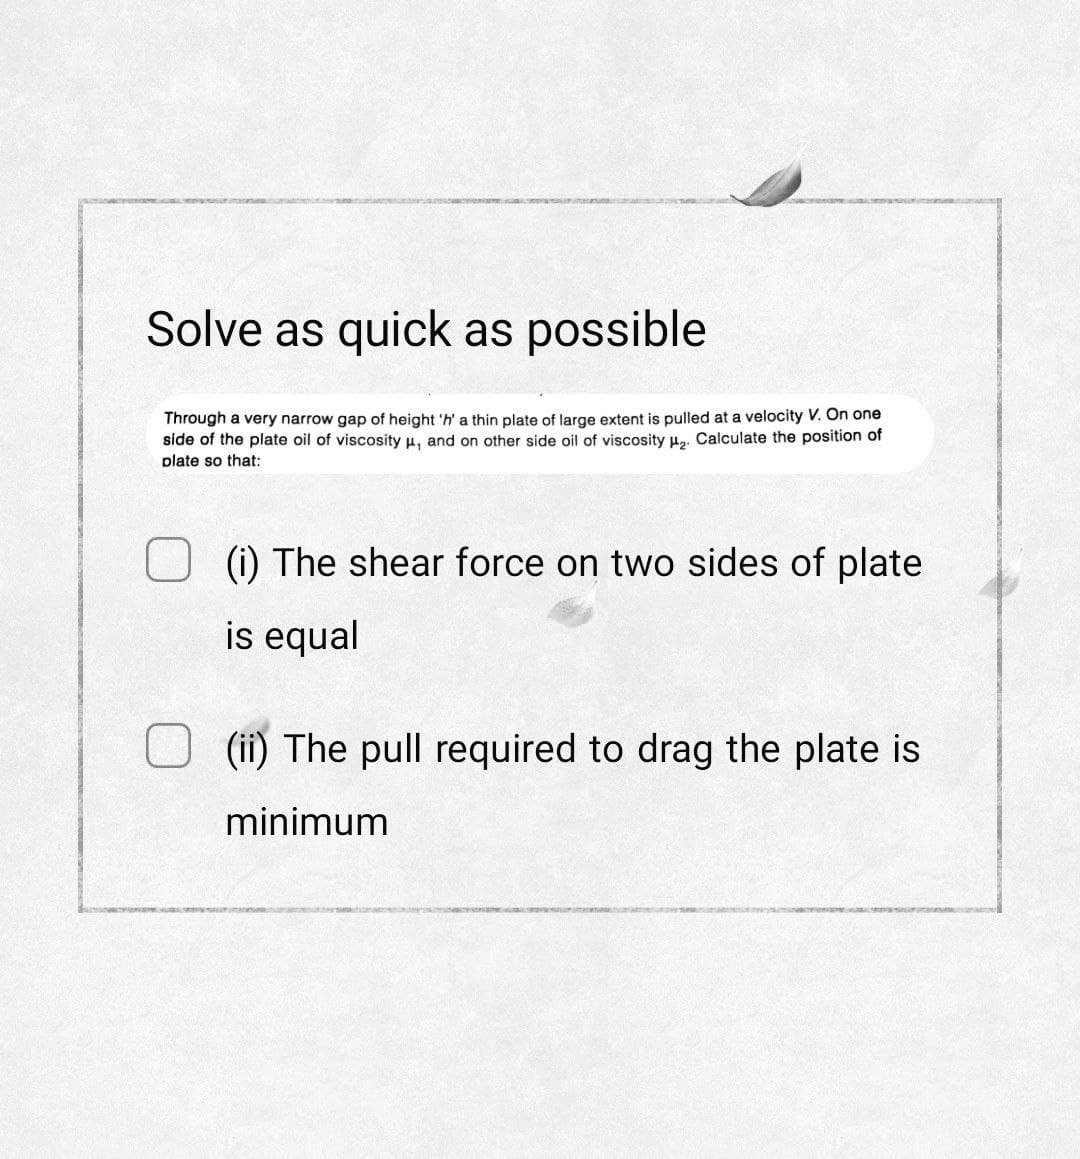 Solve as quick as possible
Through a very narrow gap of height 'h' a thin plate of large extent is pulled at a velocity V. On one
side of the plate oil of viscosity μ, and on other side oil of viscosity ₂. Calculate the position of
plate so that:
(i) The shear force on two sides of plate
is equal
(ii) The pull required to drag the plate is
minimum